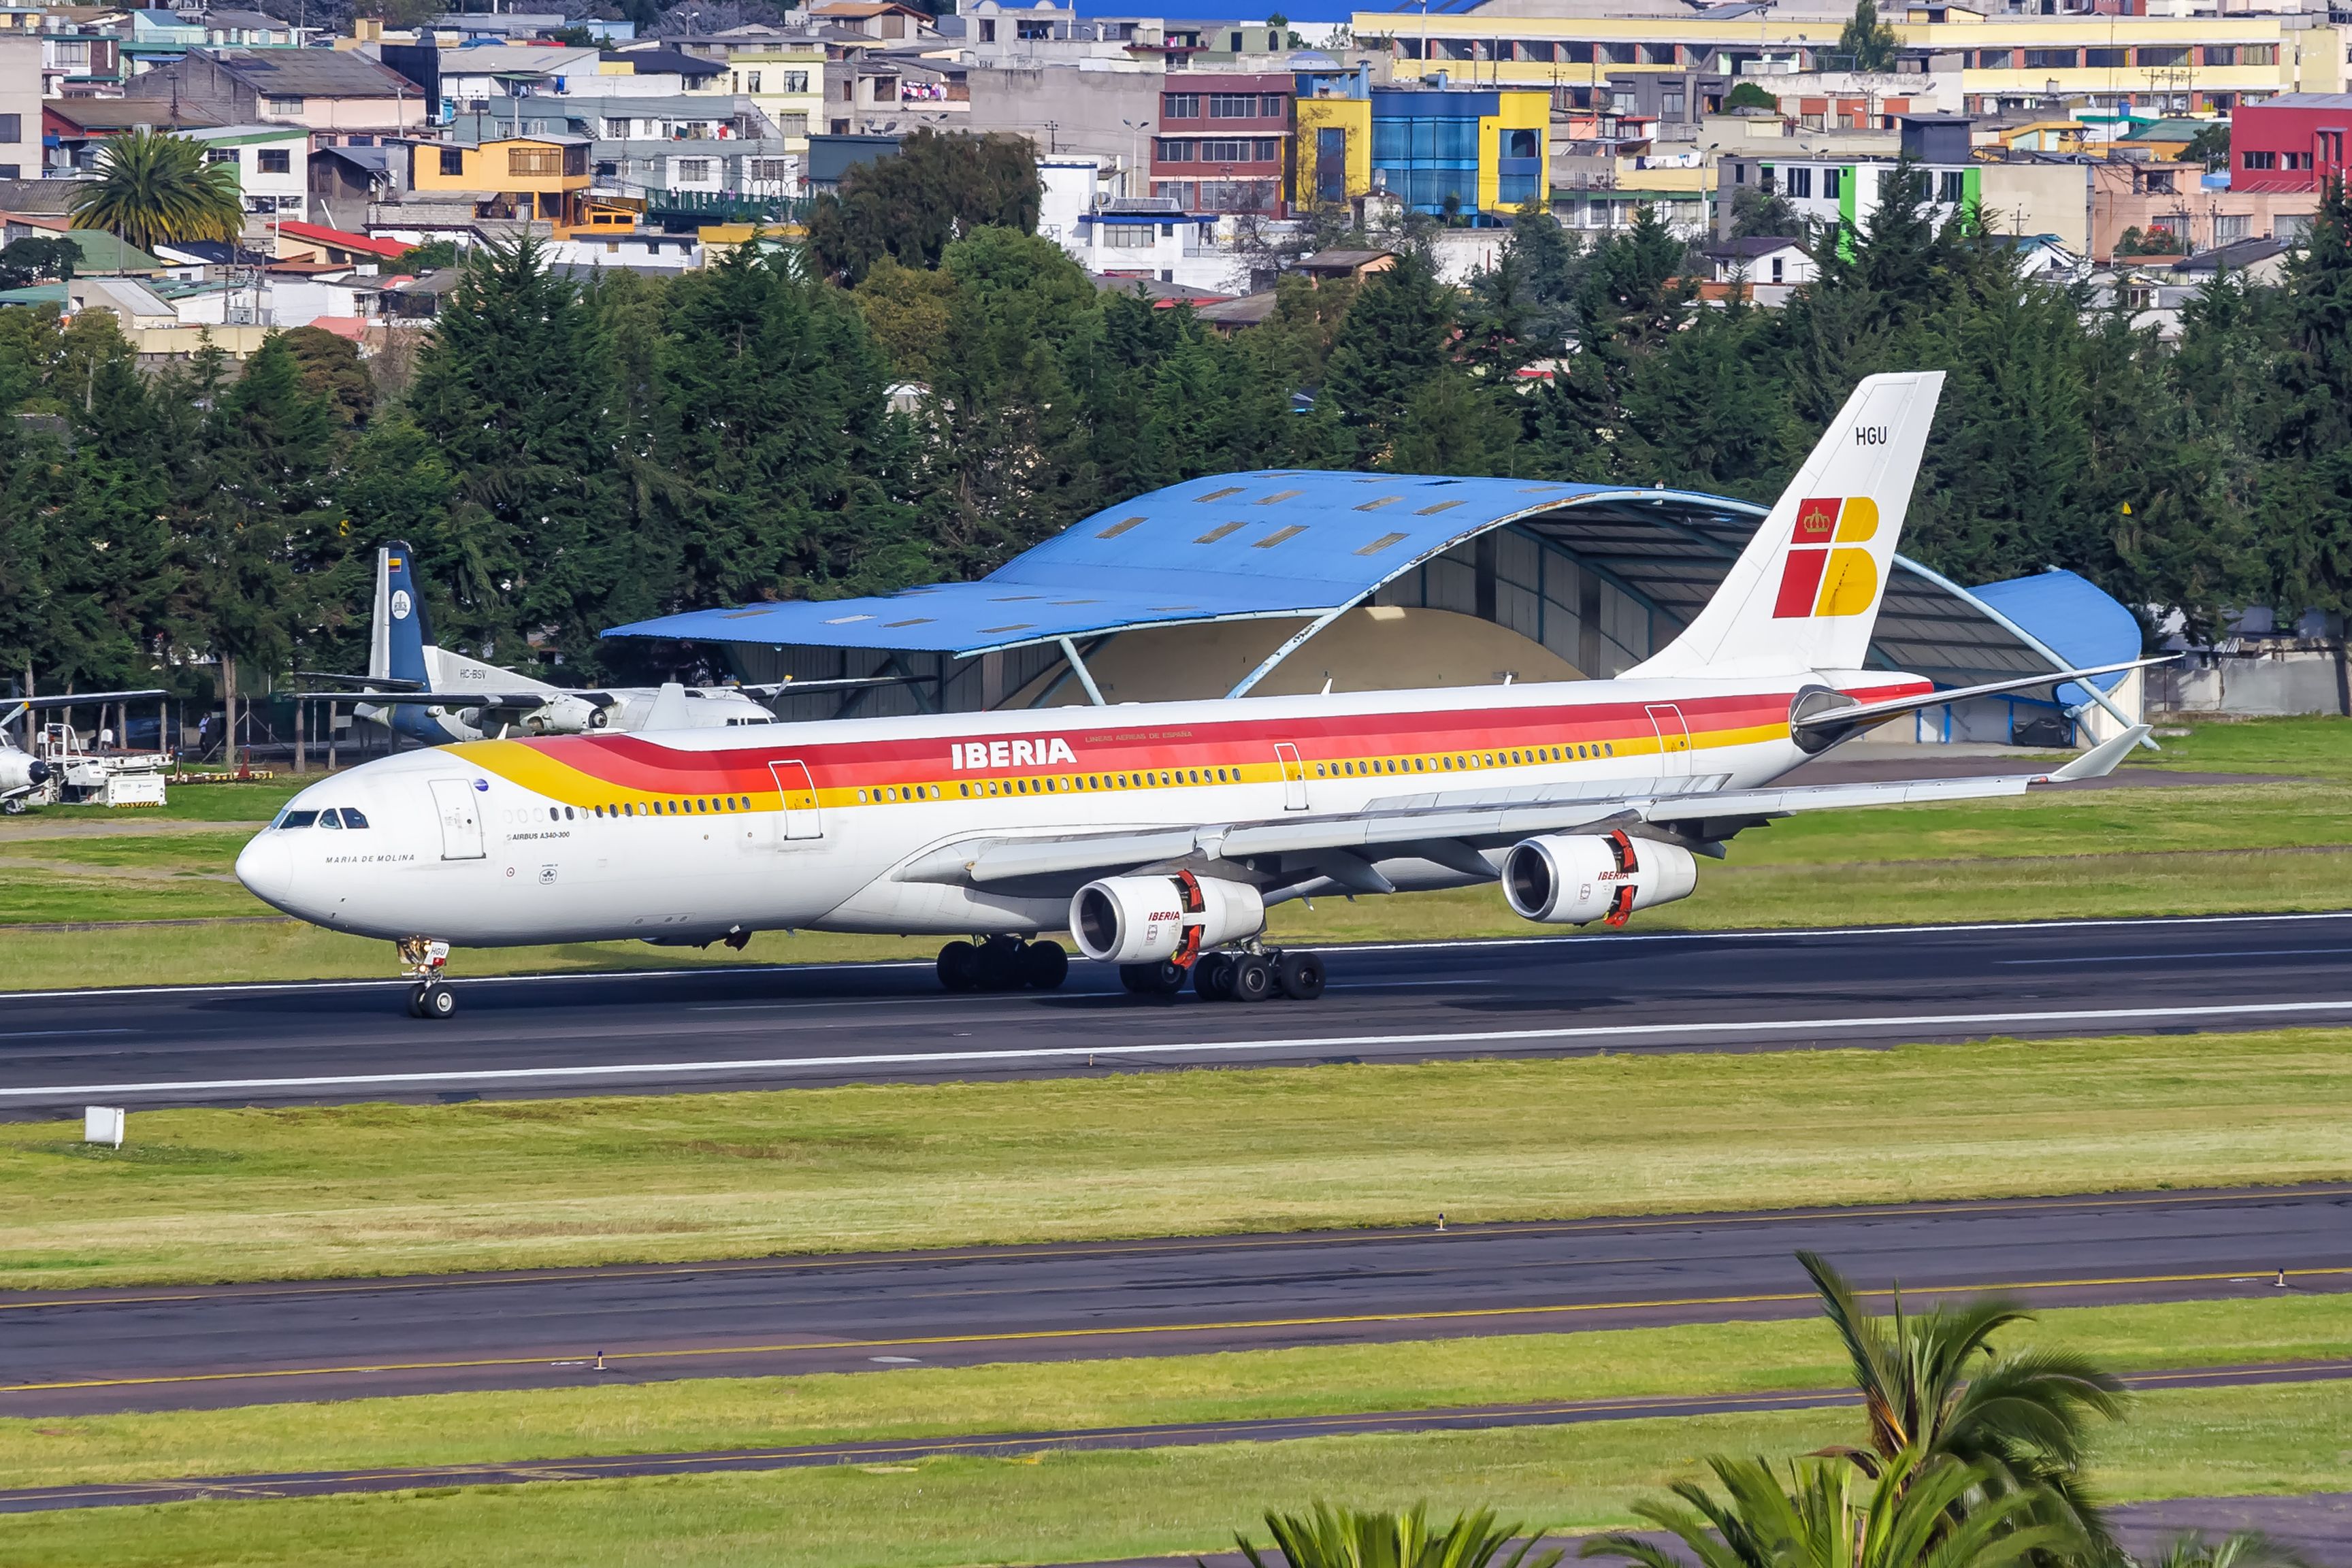 An Iberia Airbus A340 taxiing to the runway.